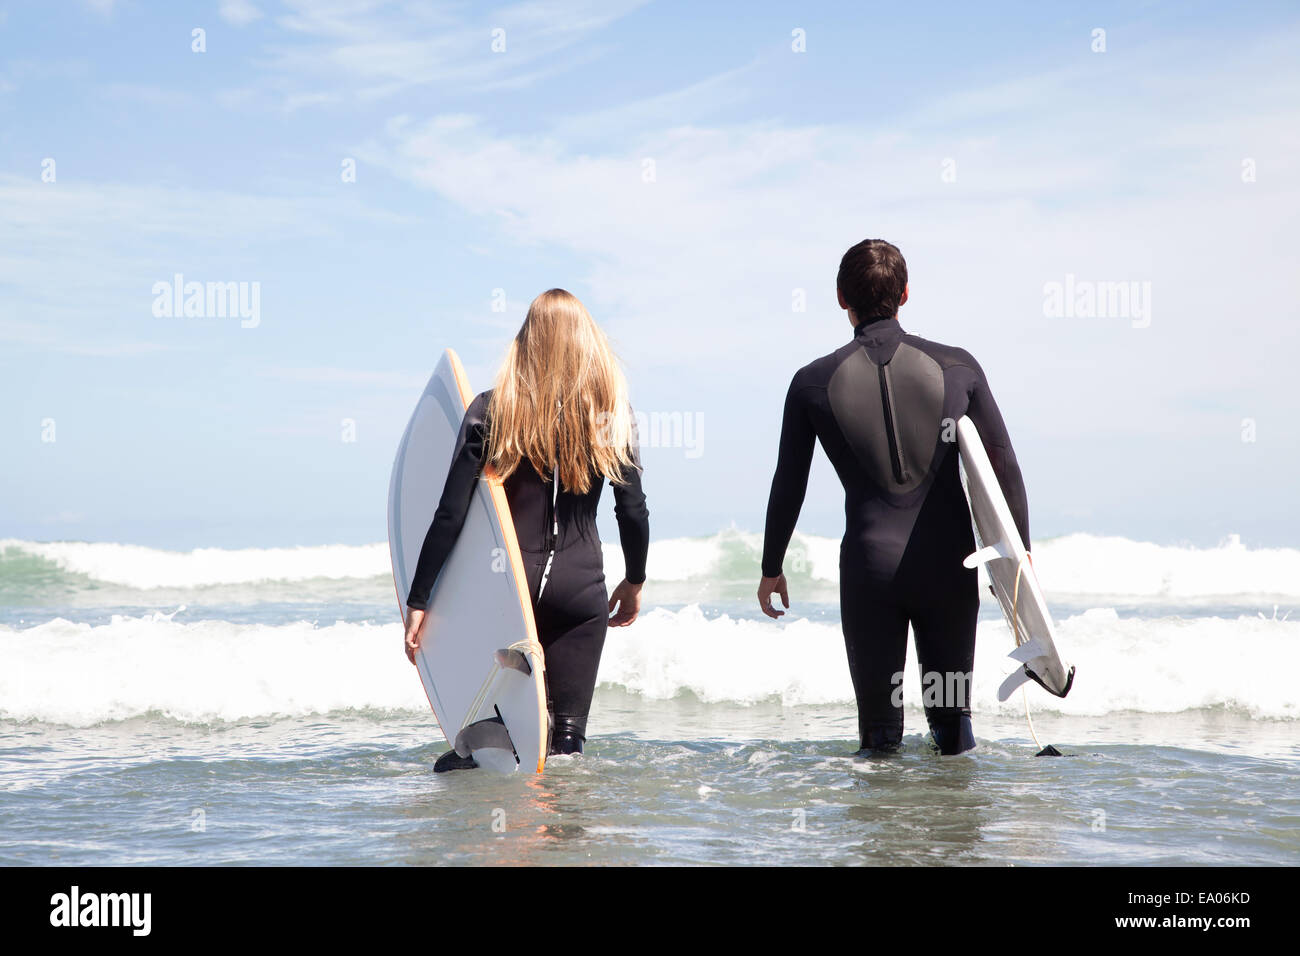 Young couple walking out to sea holding surfboards, rear view Stock Photo